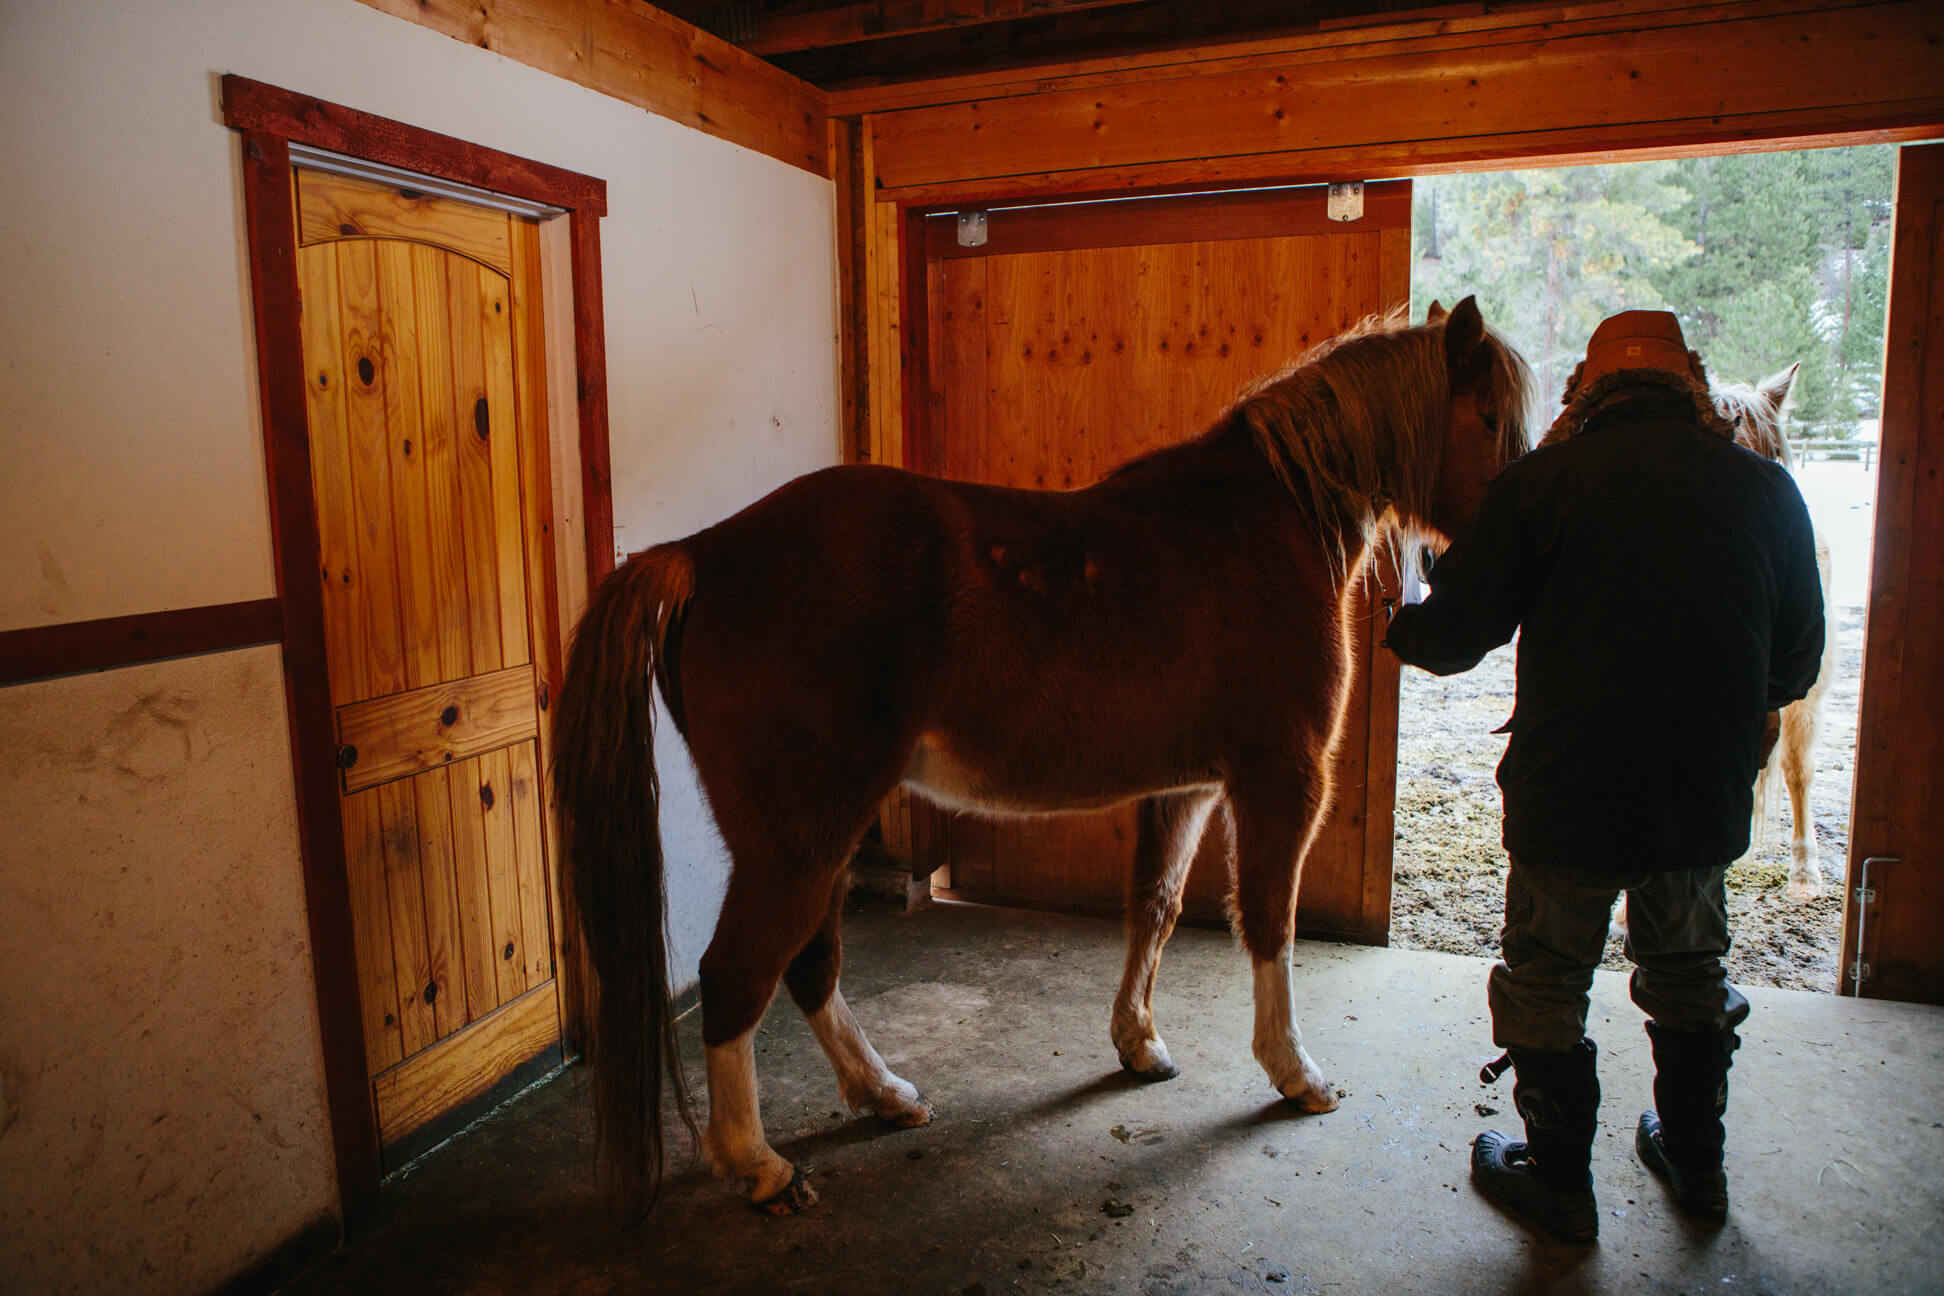 James Lee Burke stands next to one of his horses at his home in Lolo Montana